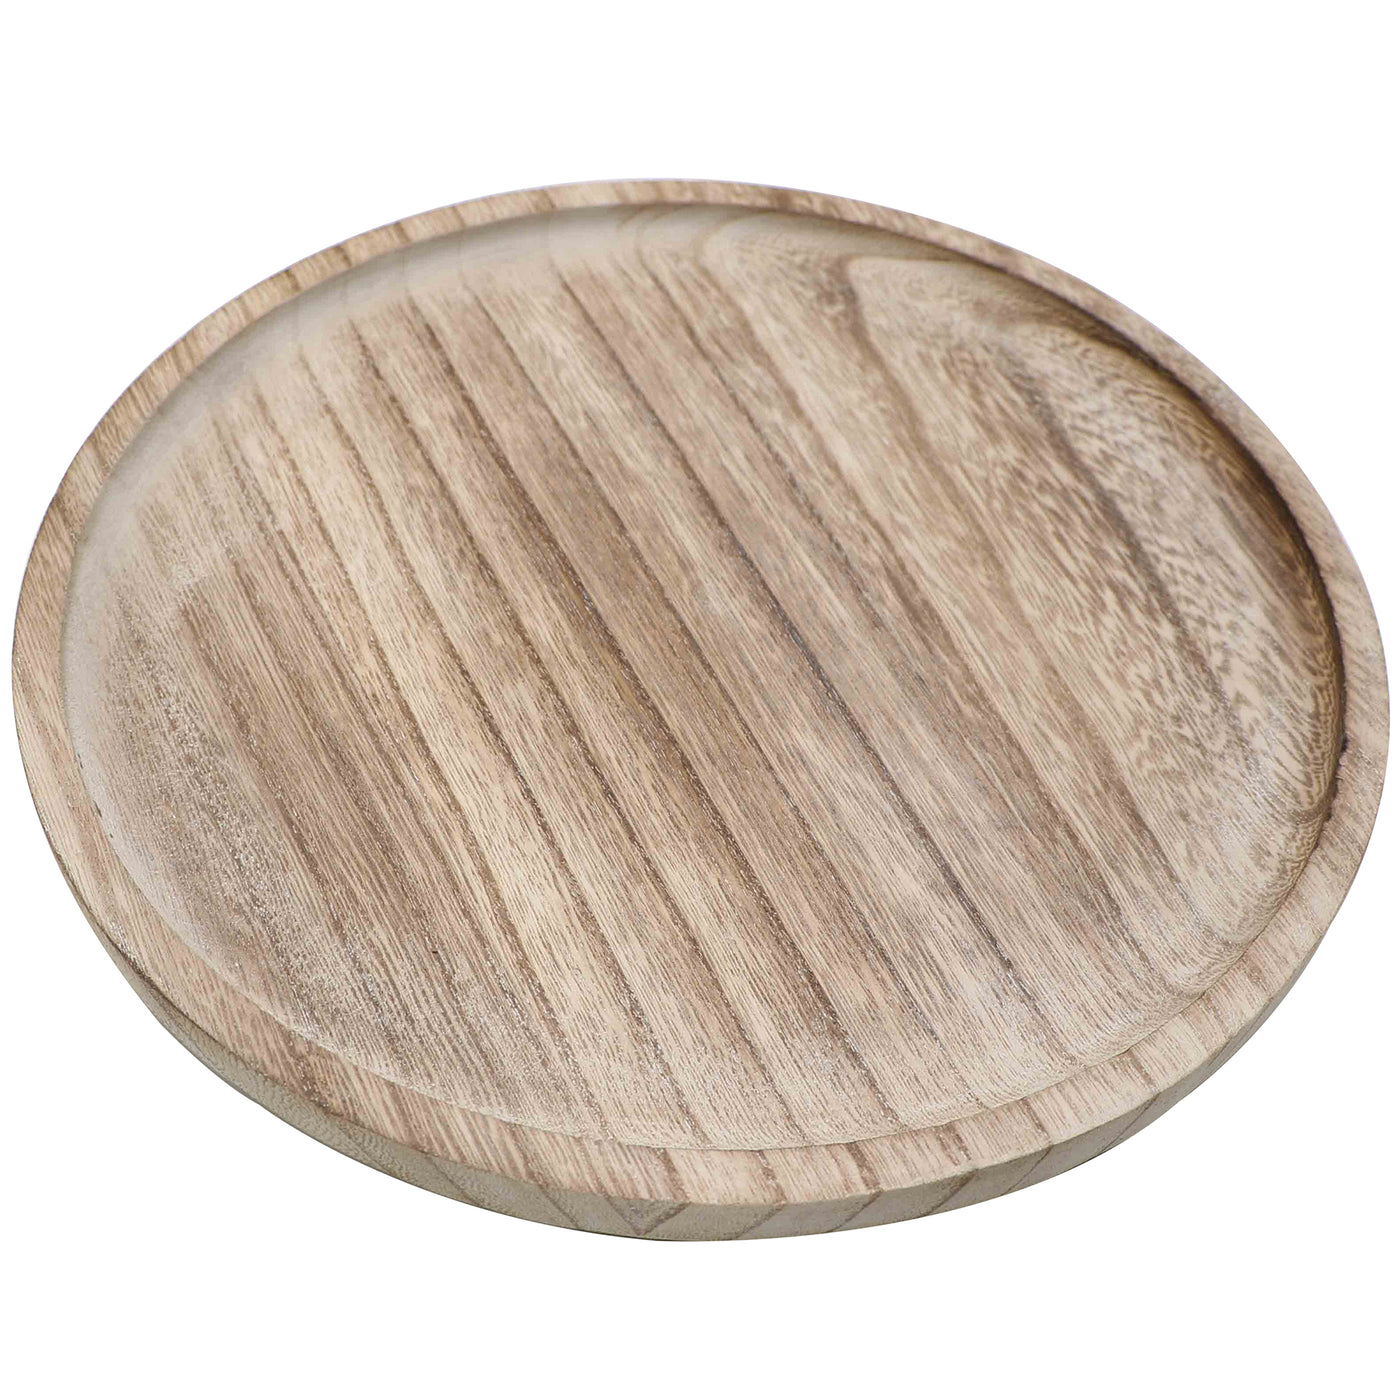 Large Rustic Round Wood Tray - Sweet Water Decor - Trays